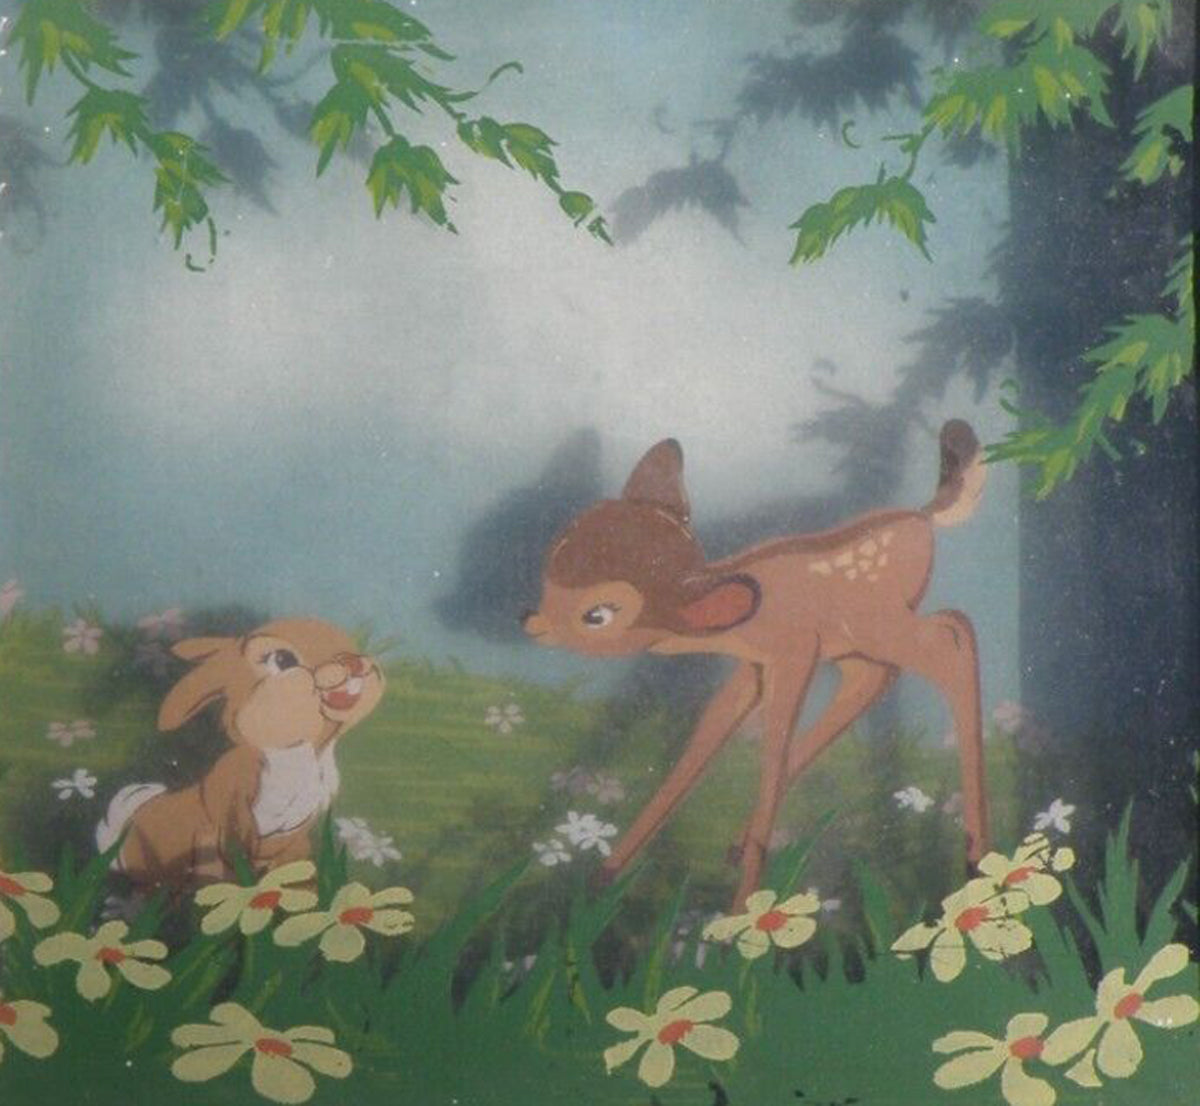 Original Walt Disney Multiplane Painting from Bambi featuring Bambi and Thumper